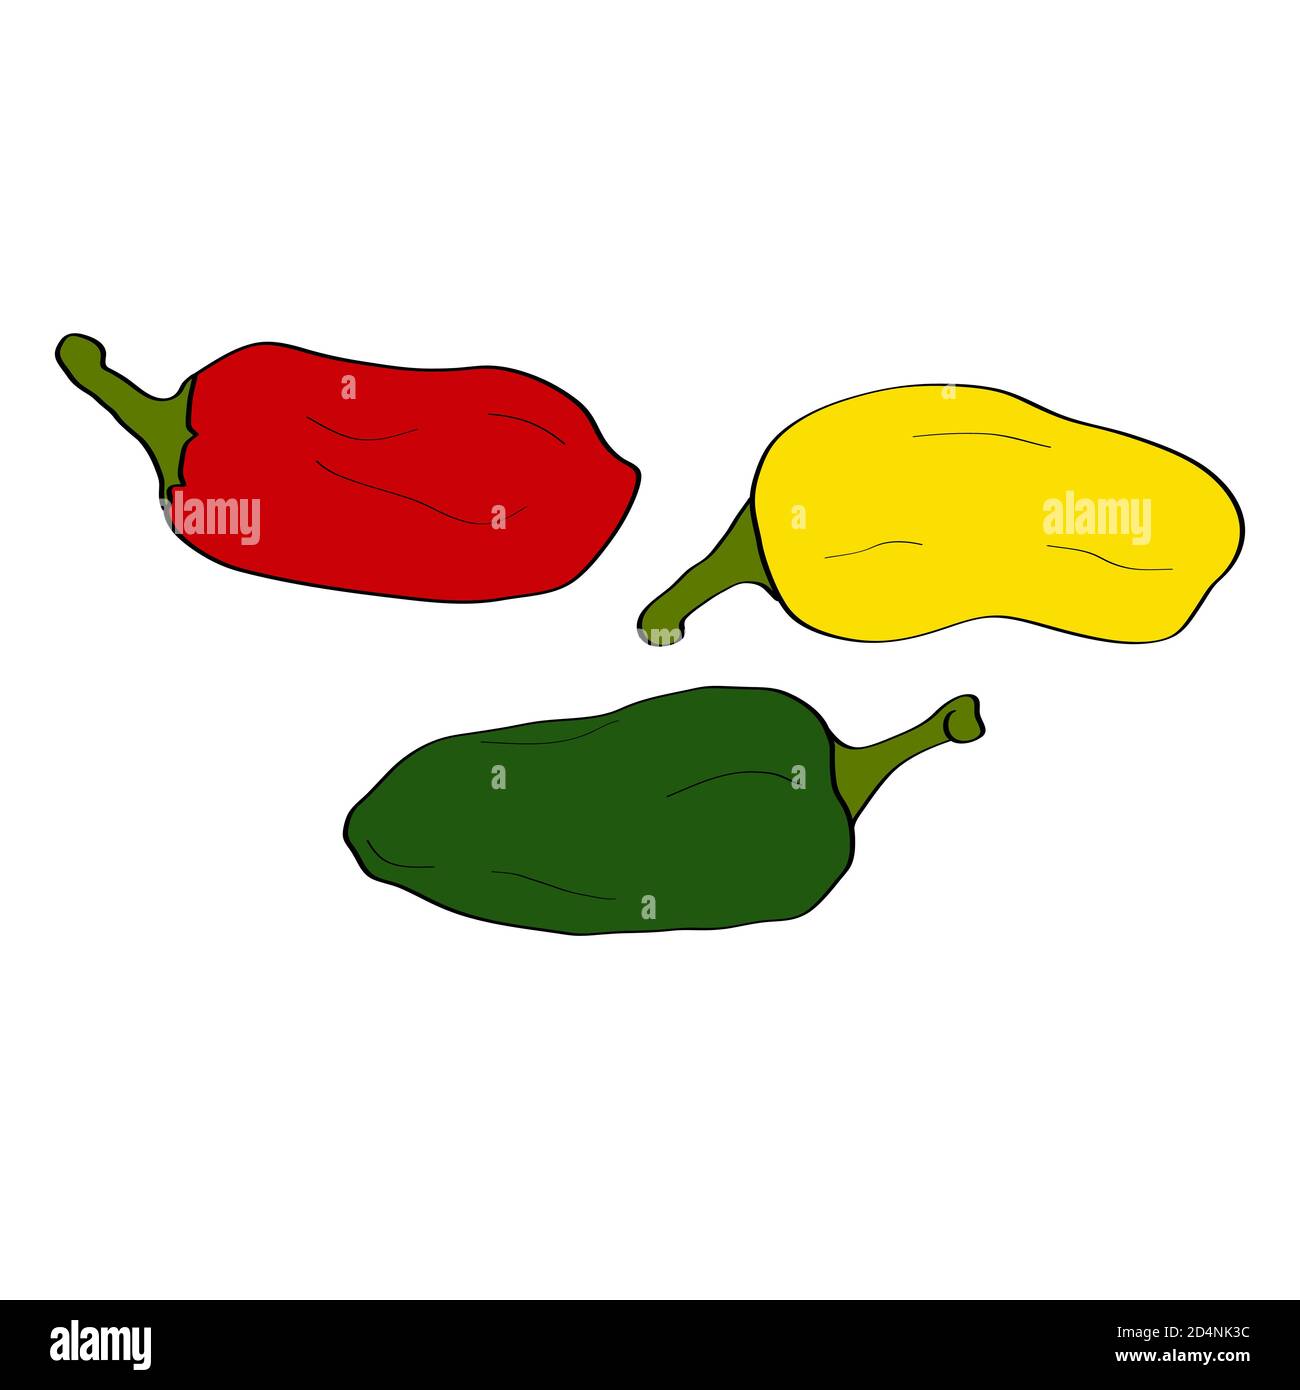 August 5, 2015: Green Peppers Day; National Underwear Day – Holiday Doodles!